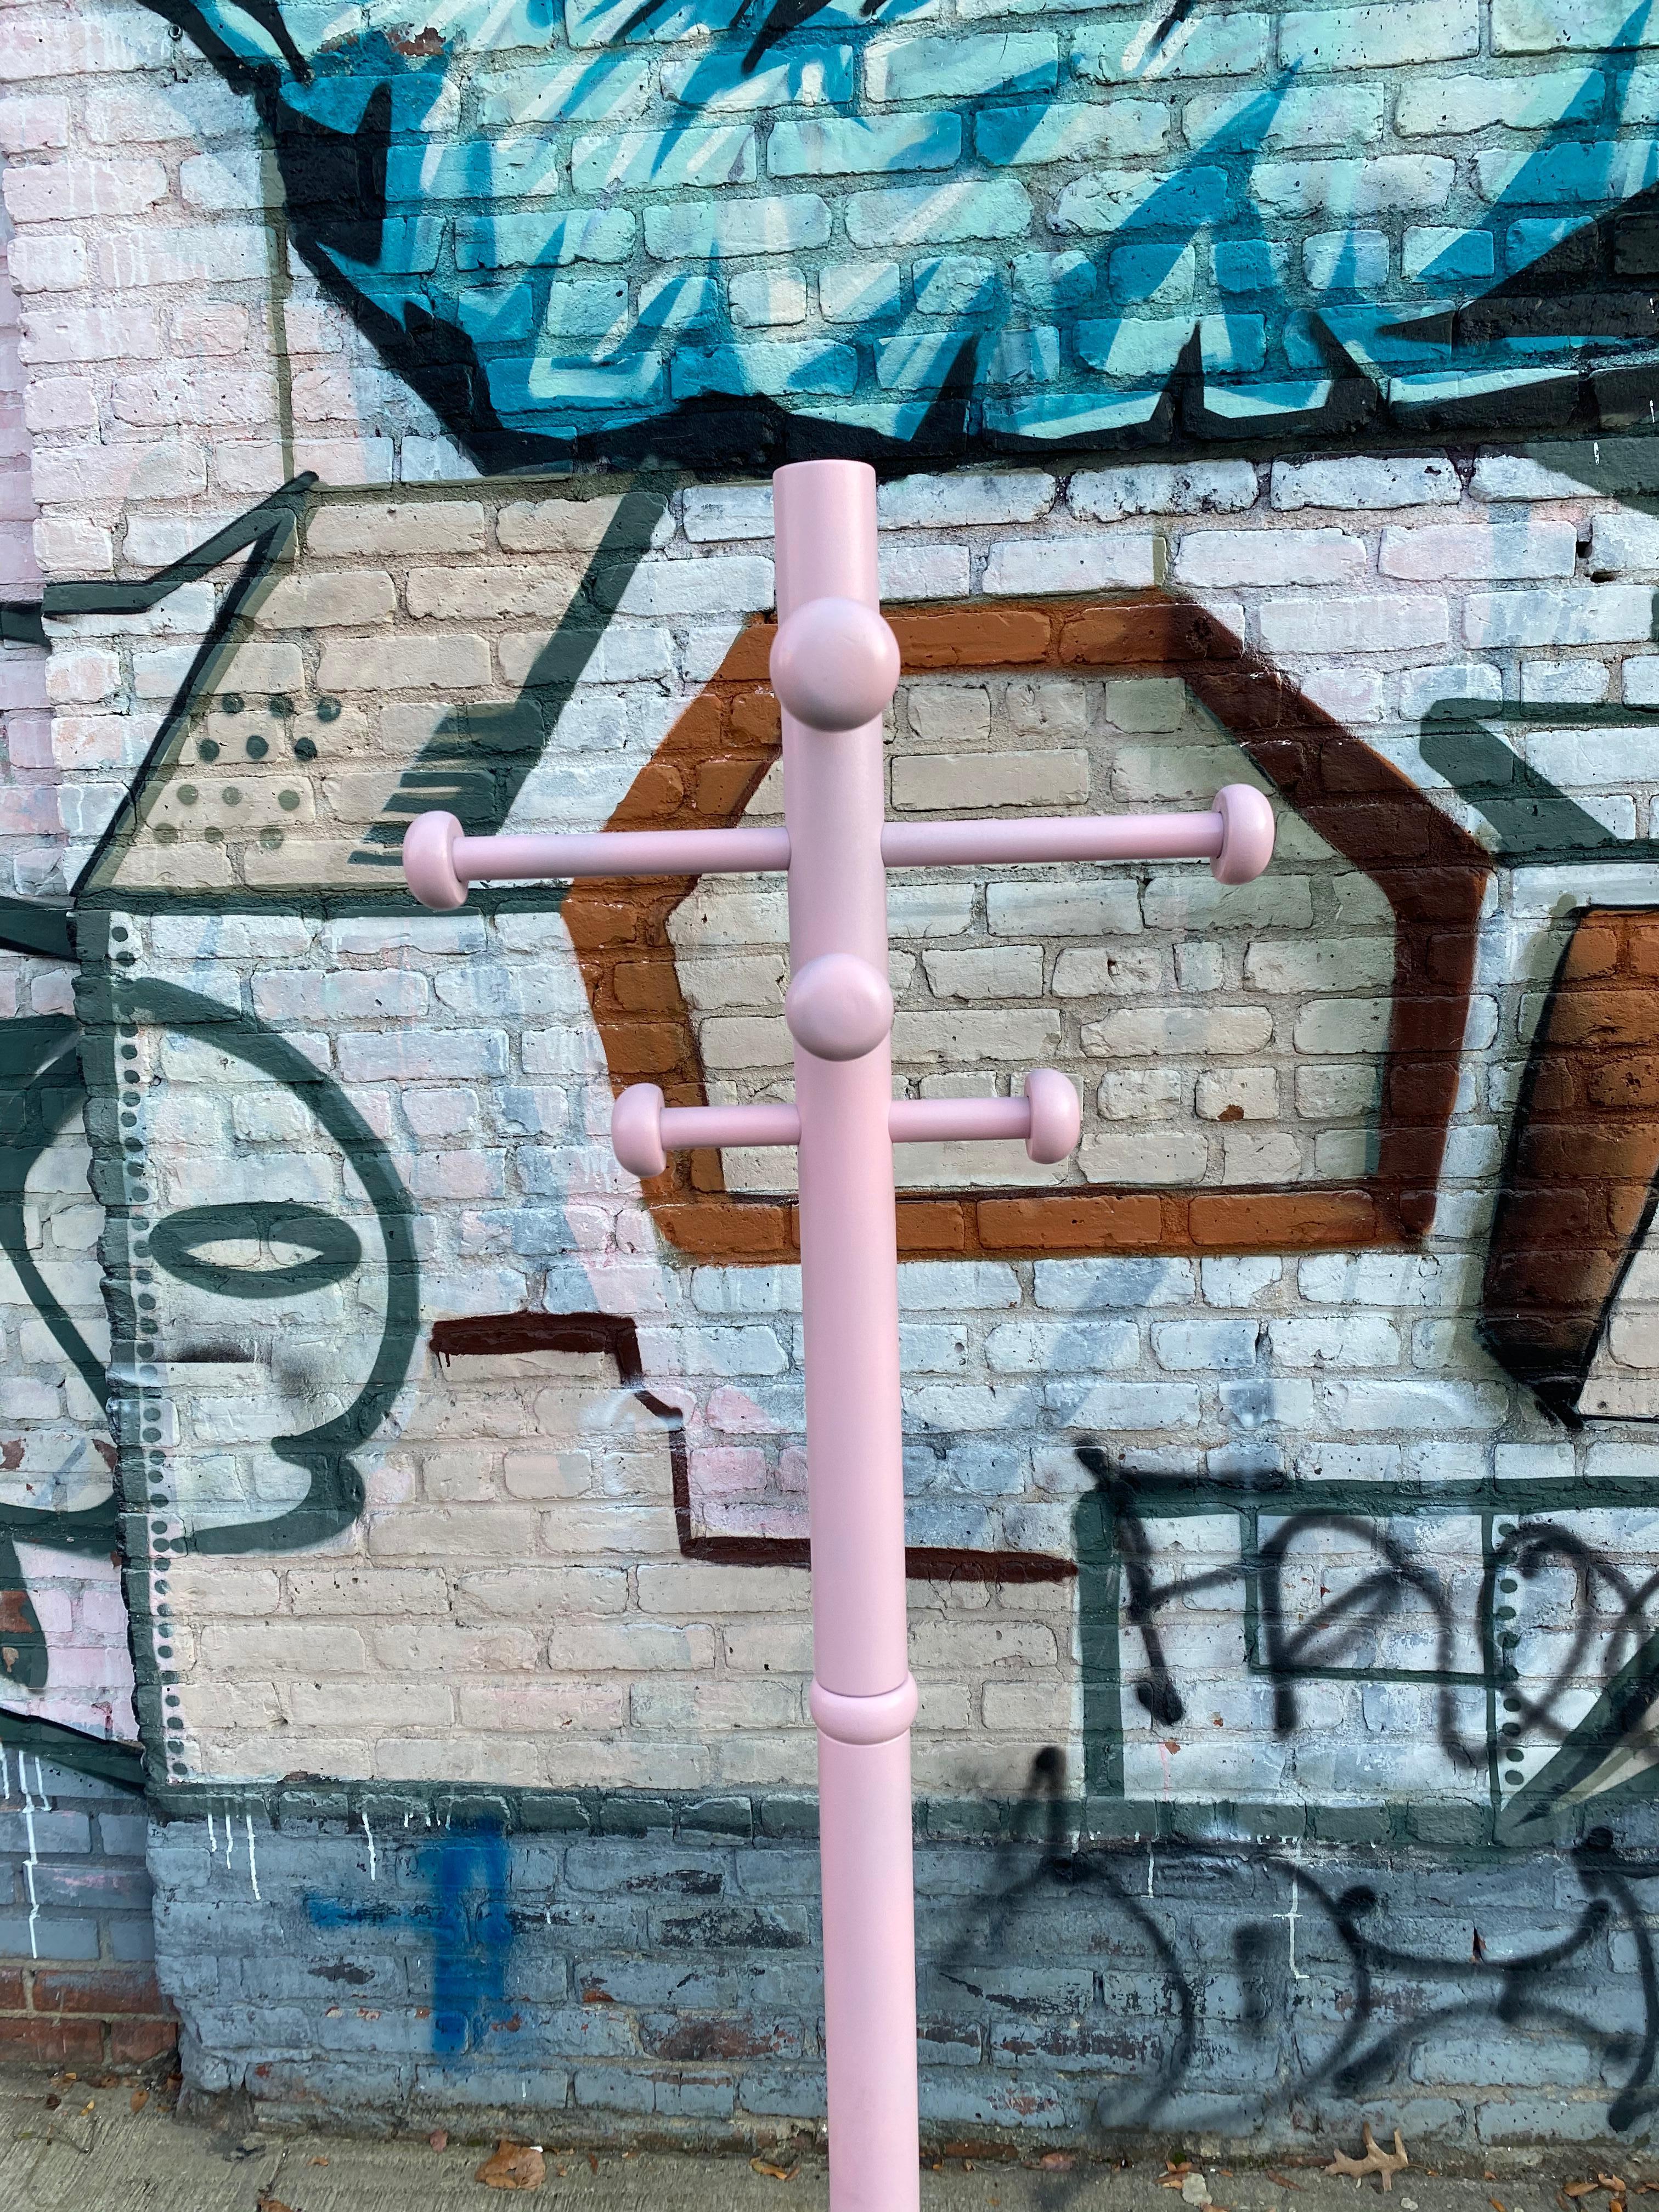 Modern atomic style coat rack or coat tree in pink. Bright even color makes a pop of color in a functional piece of furniture to hold jackets, scarves, hats, umbrellas, etc. Solid wood construction and to hang 8 or more items. Recoated in millennial